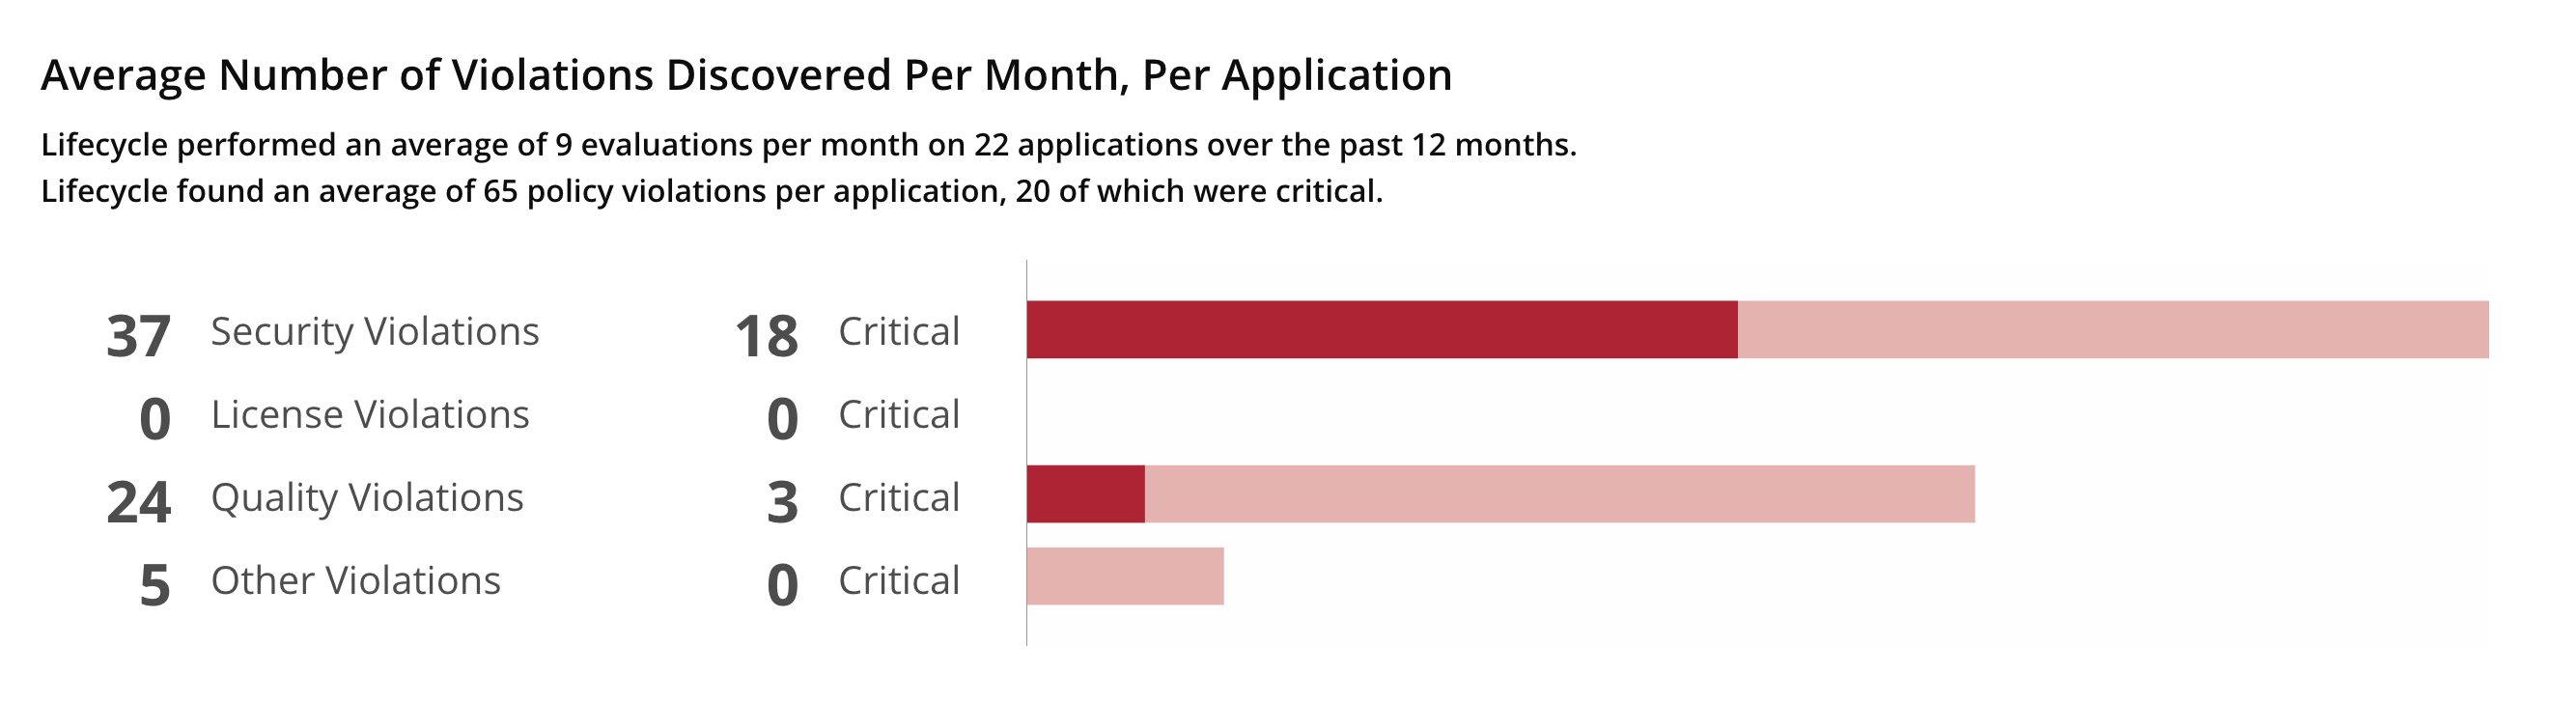 Screenshot of Average Number of Violations Discovered Per Month, Per Application